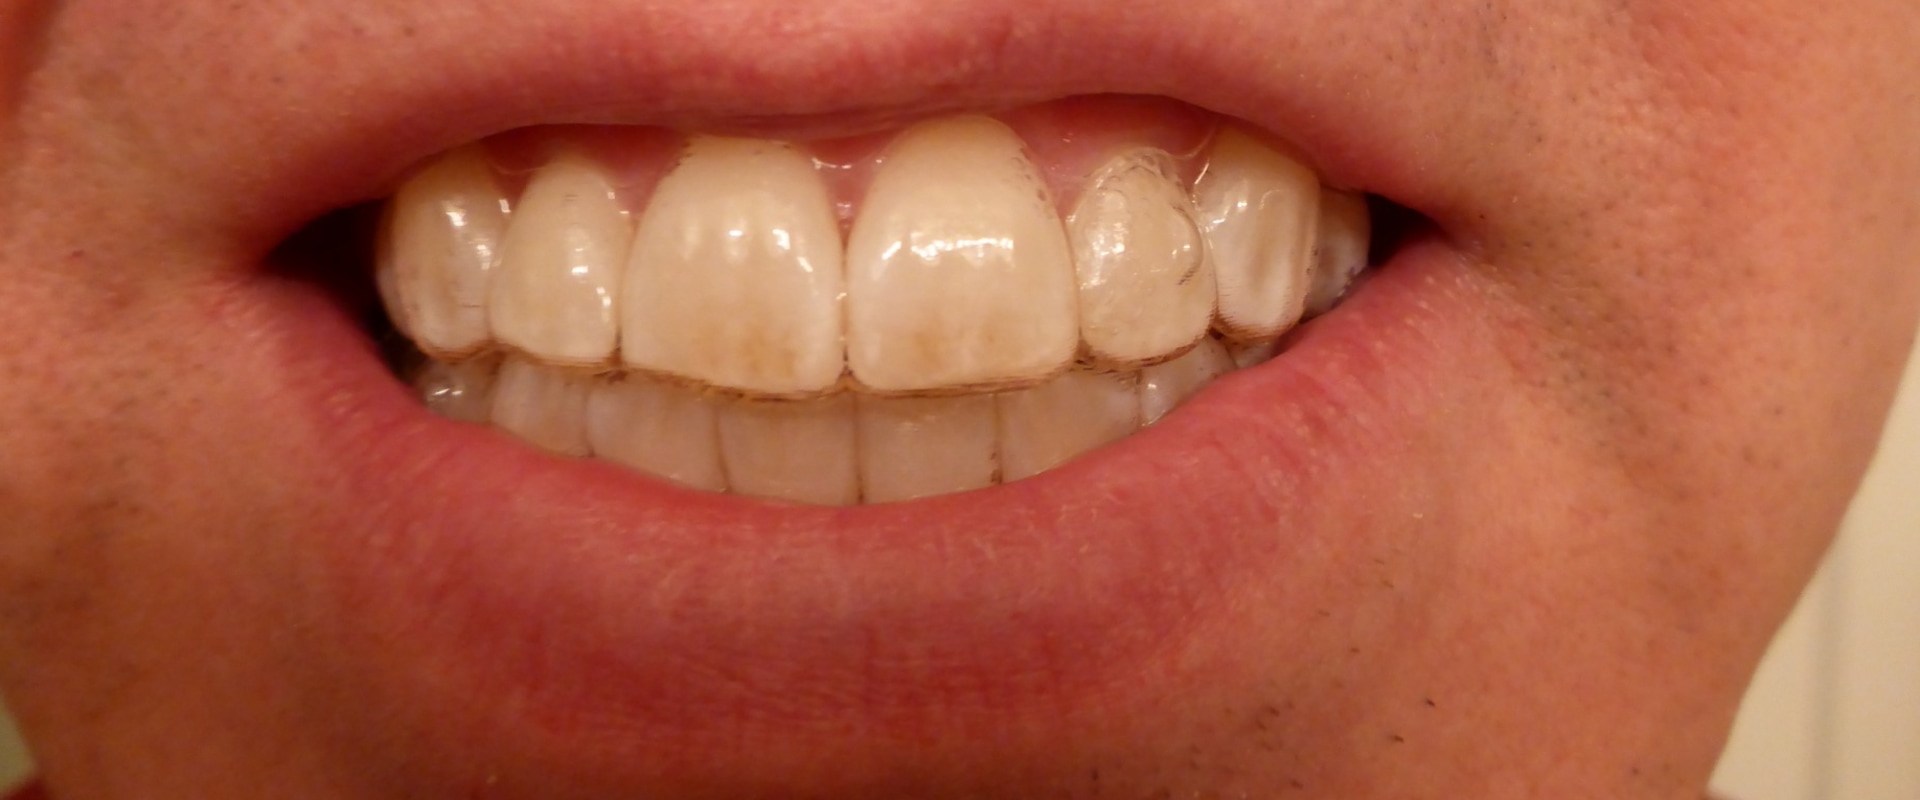 Can Invisalign Damage Your Teeth?